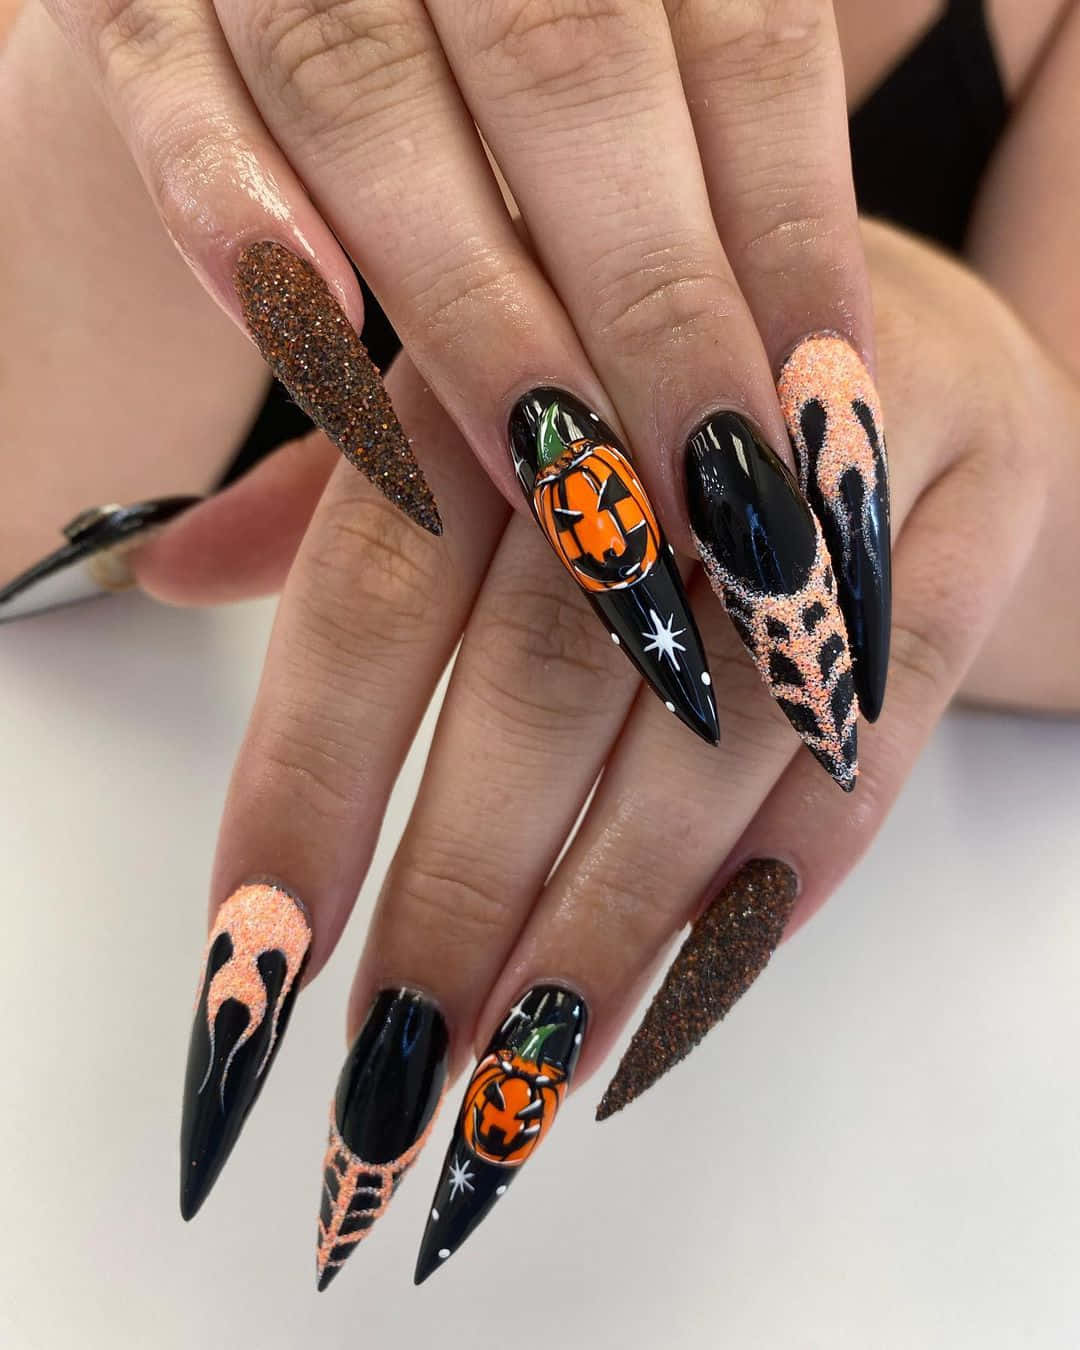 Get Your Nails Ready For A Spooky Halloween Celebration Wallpaper